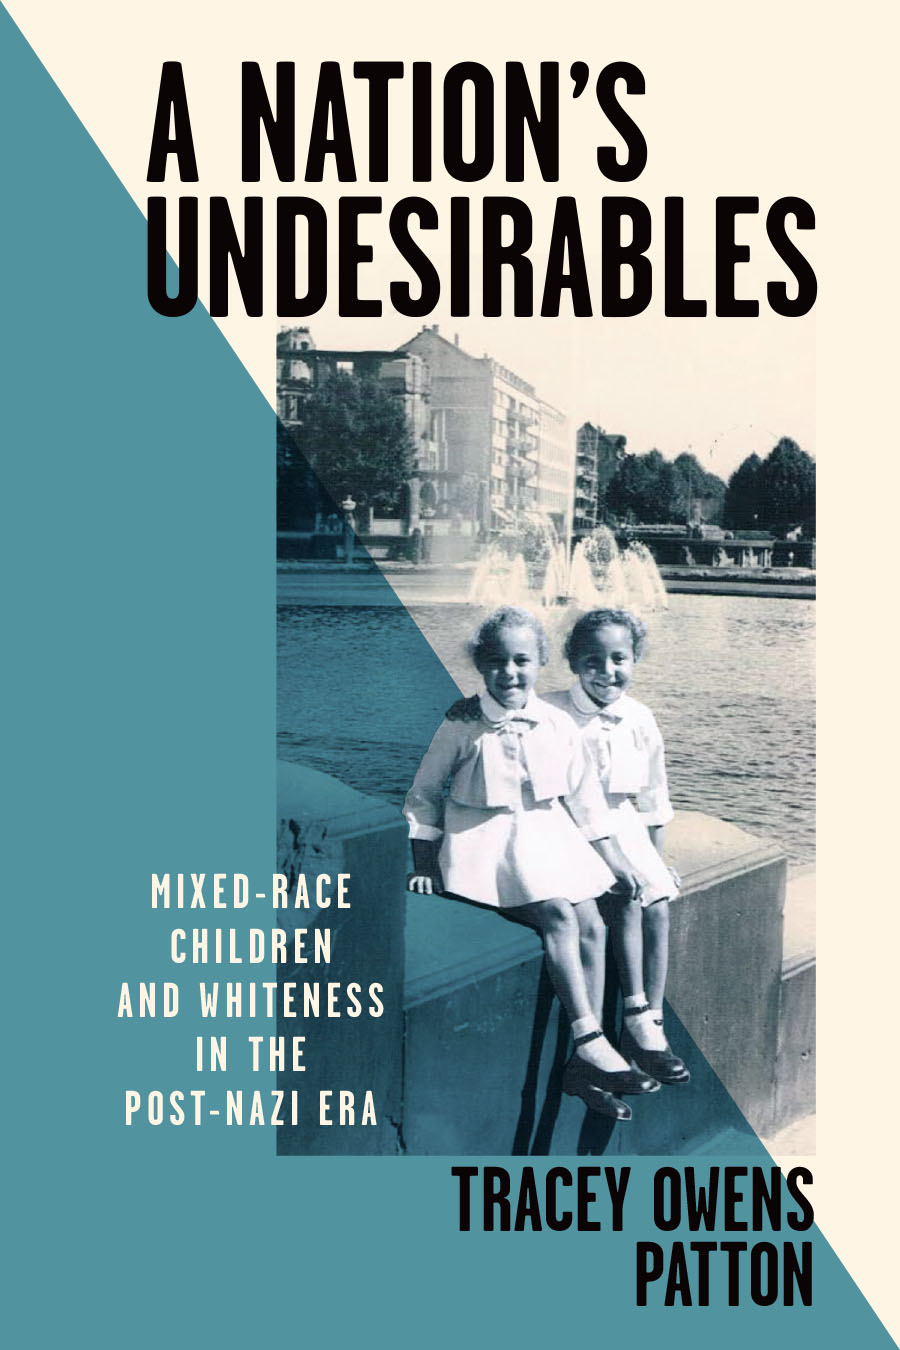 Front cover of A Nation’s Undesirables: Mixed-Race Children and Whiteness in the Post-Nazi Era by Tracey Owens Patton, featuring a black-and-white photo of two smiling young girls, sitting together in front of a fountain in a city park.